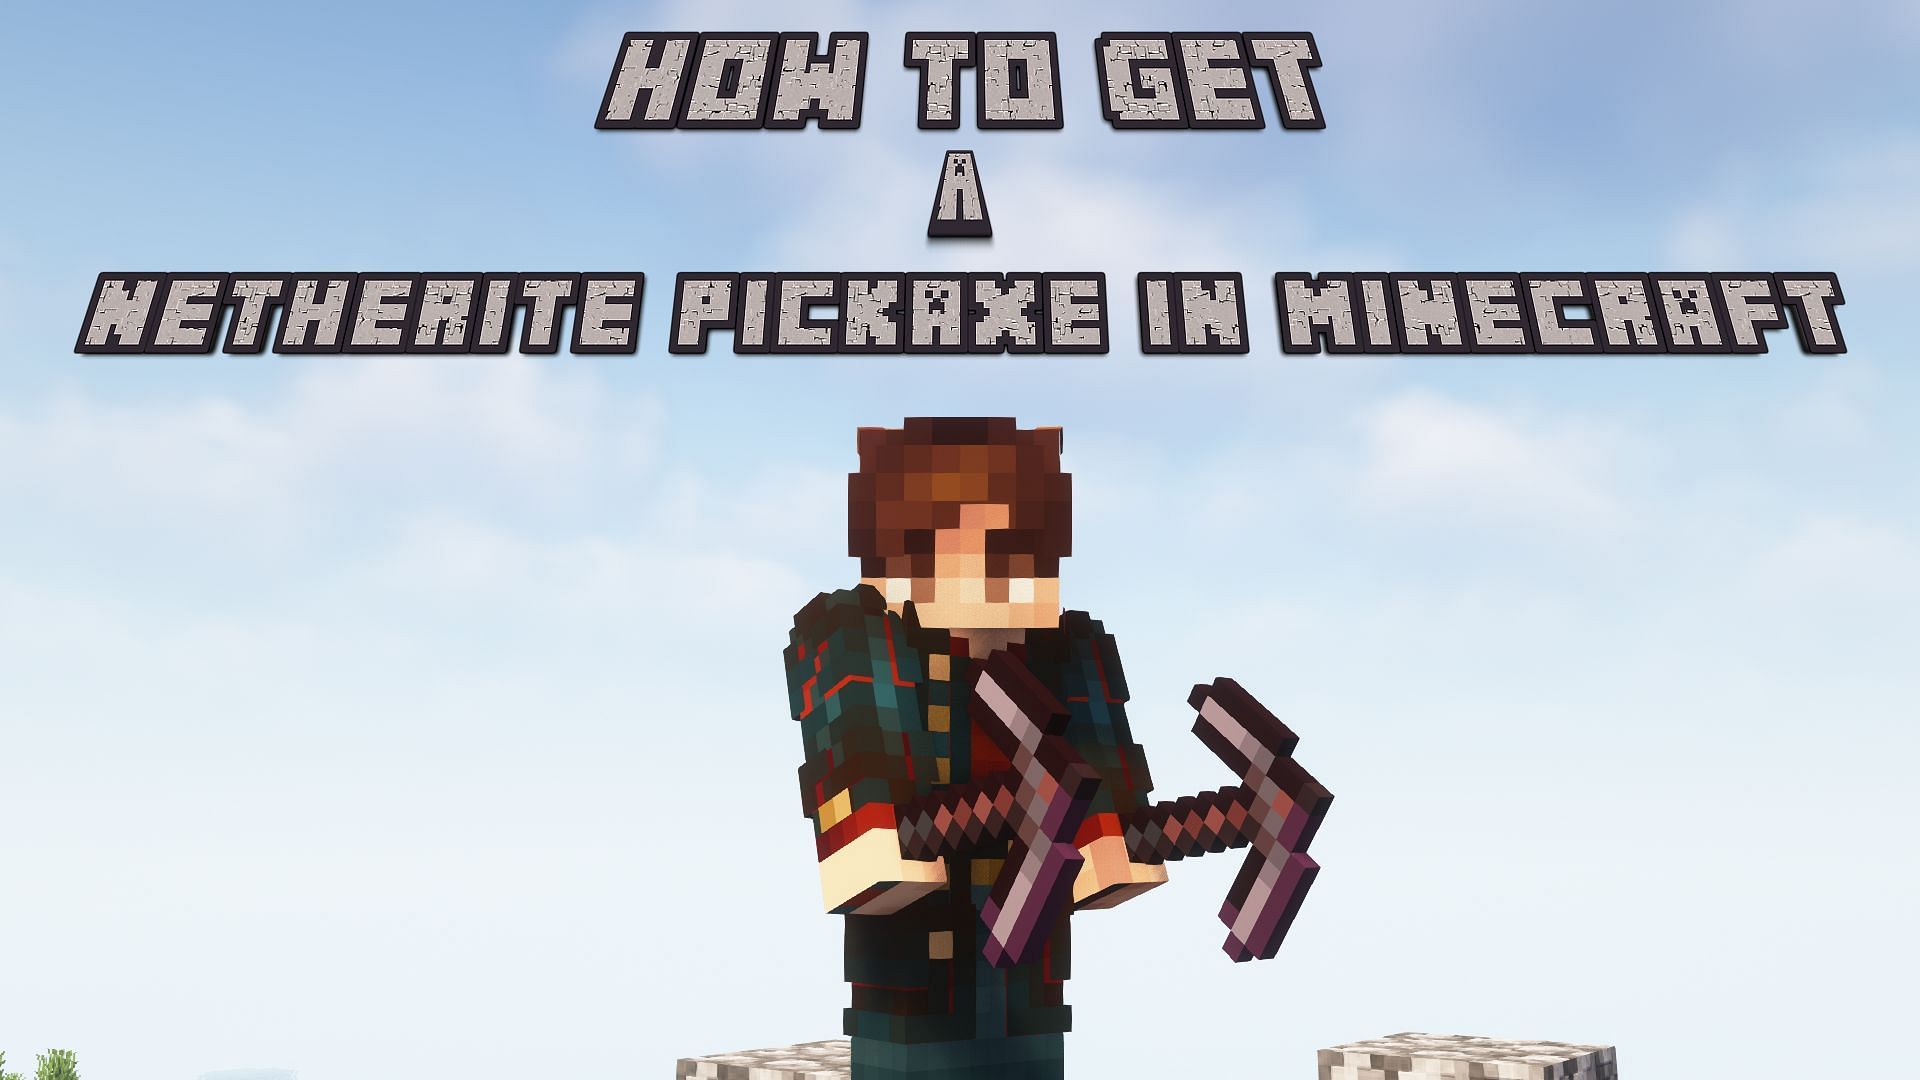 UPGRADING MY OP PICKAXE! (FREE RANKS)